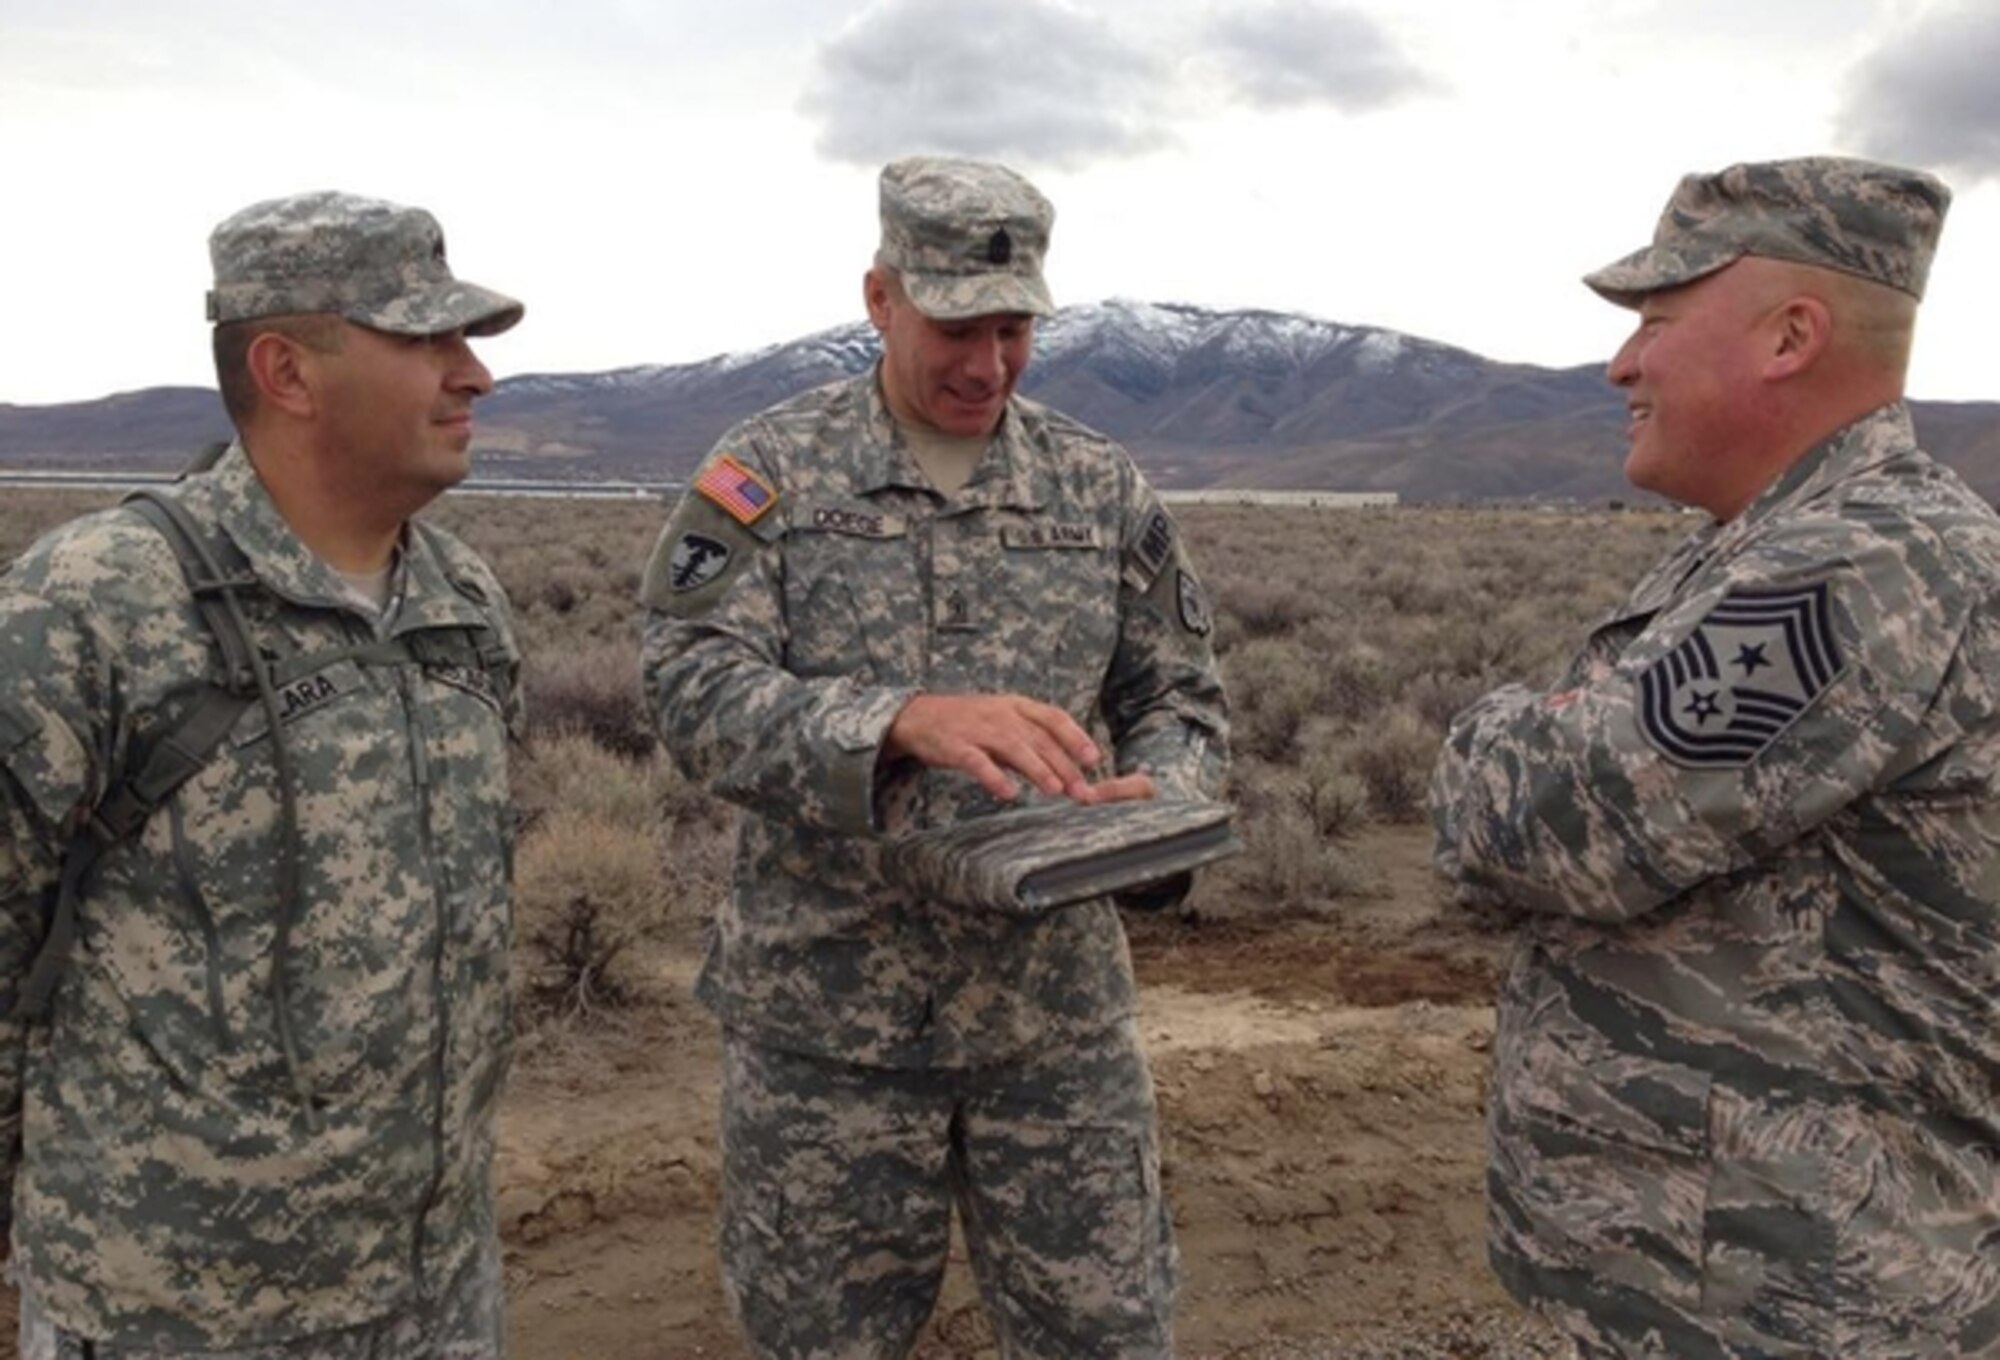 Air Force Chief Master Sgt. Mitchell Brush, right, the senior enlisted advisor to the chief of the National Guard Bureau, meets with Nevada Army Guard Soldiers 1st Sgt. Elbie Doege, center, and Staff Sgt. Rutilio Lara in Reno in early December.

Photo courtesy NV ARNG 106th Public Affairs Detachment
